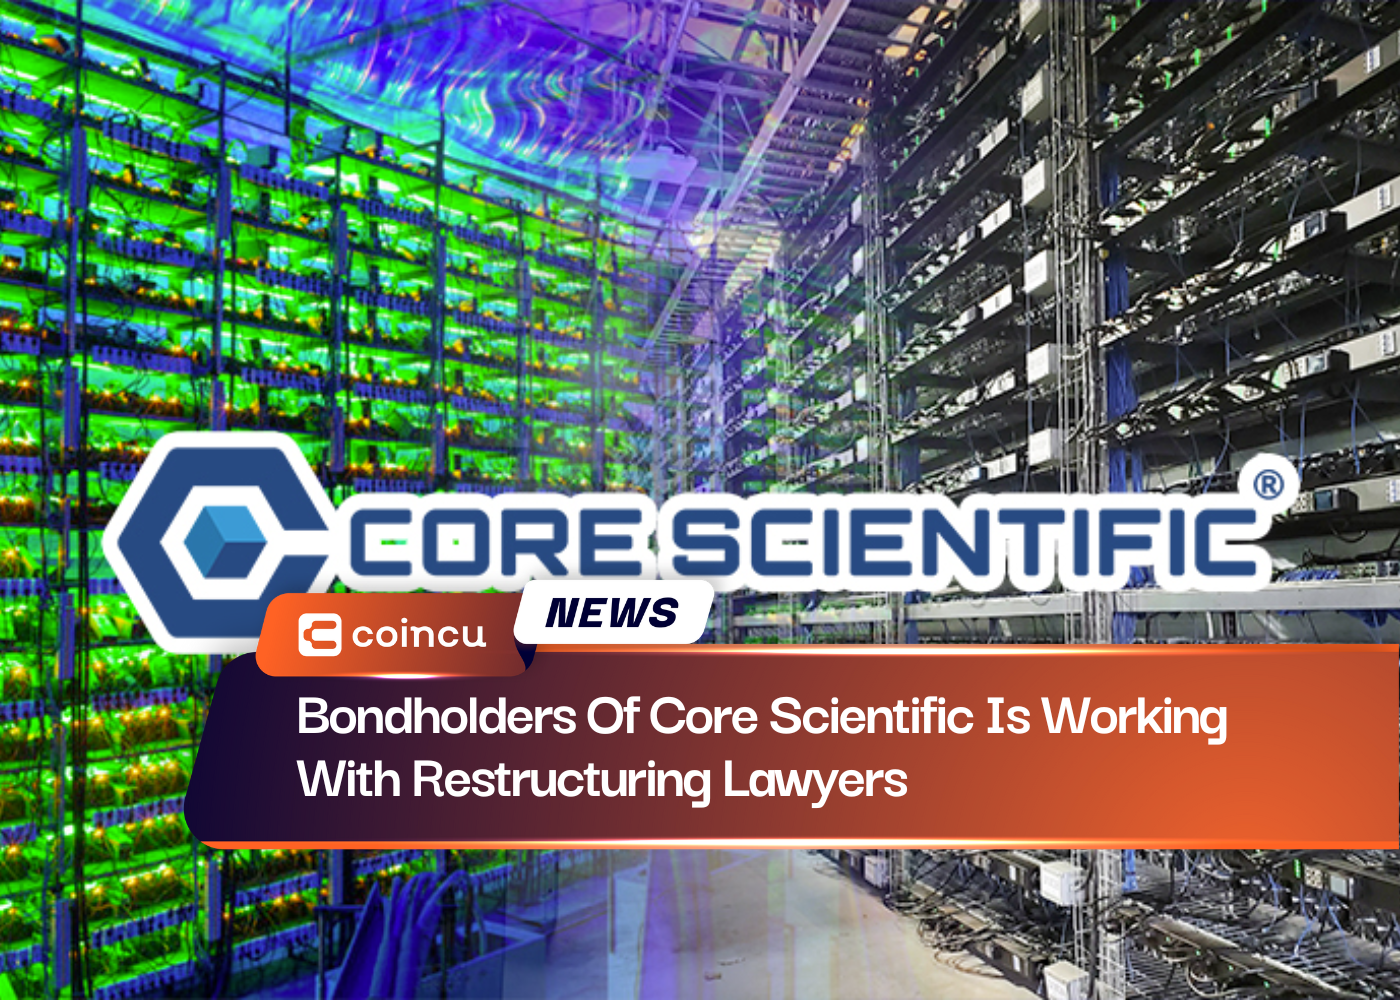 Bondholders Of Core Scientific Is Working With Restructuring Lawyers